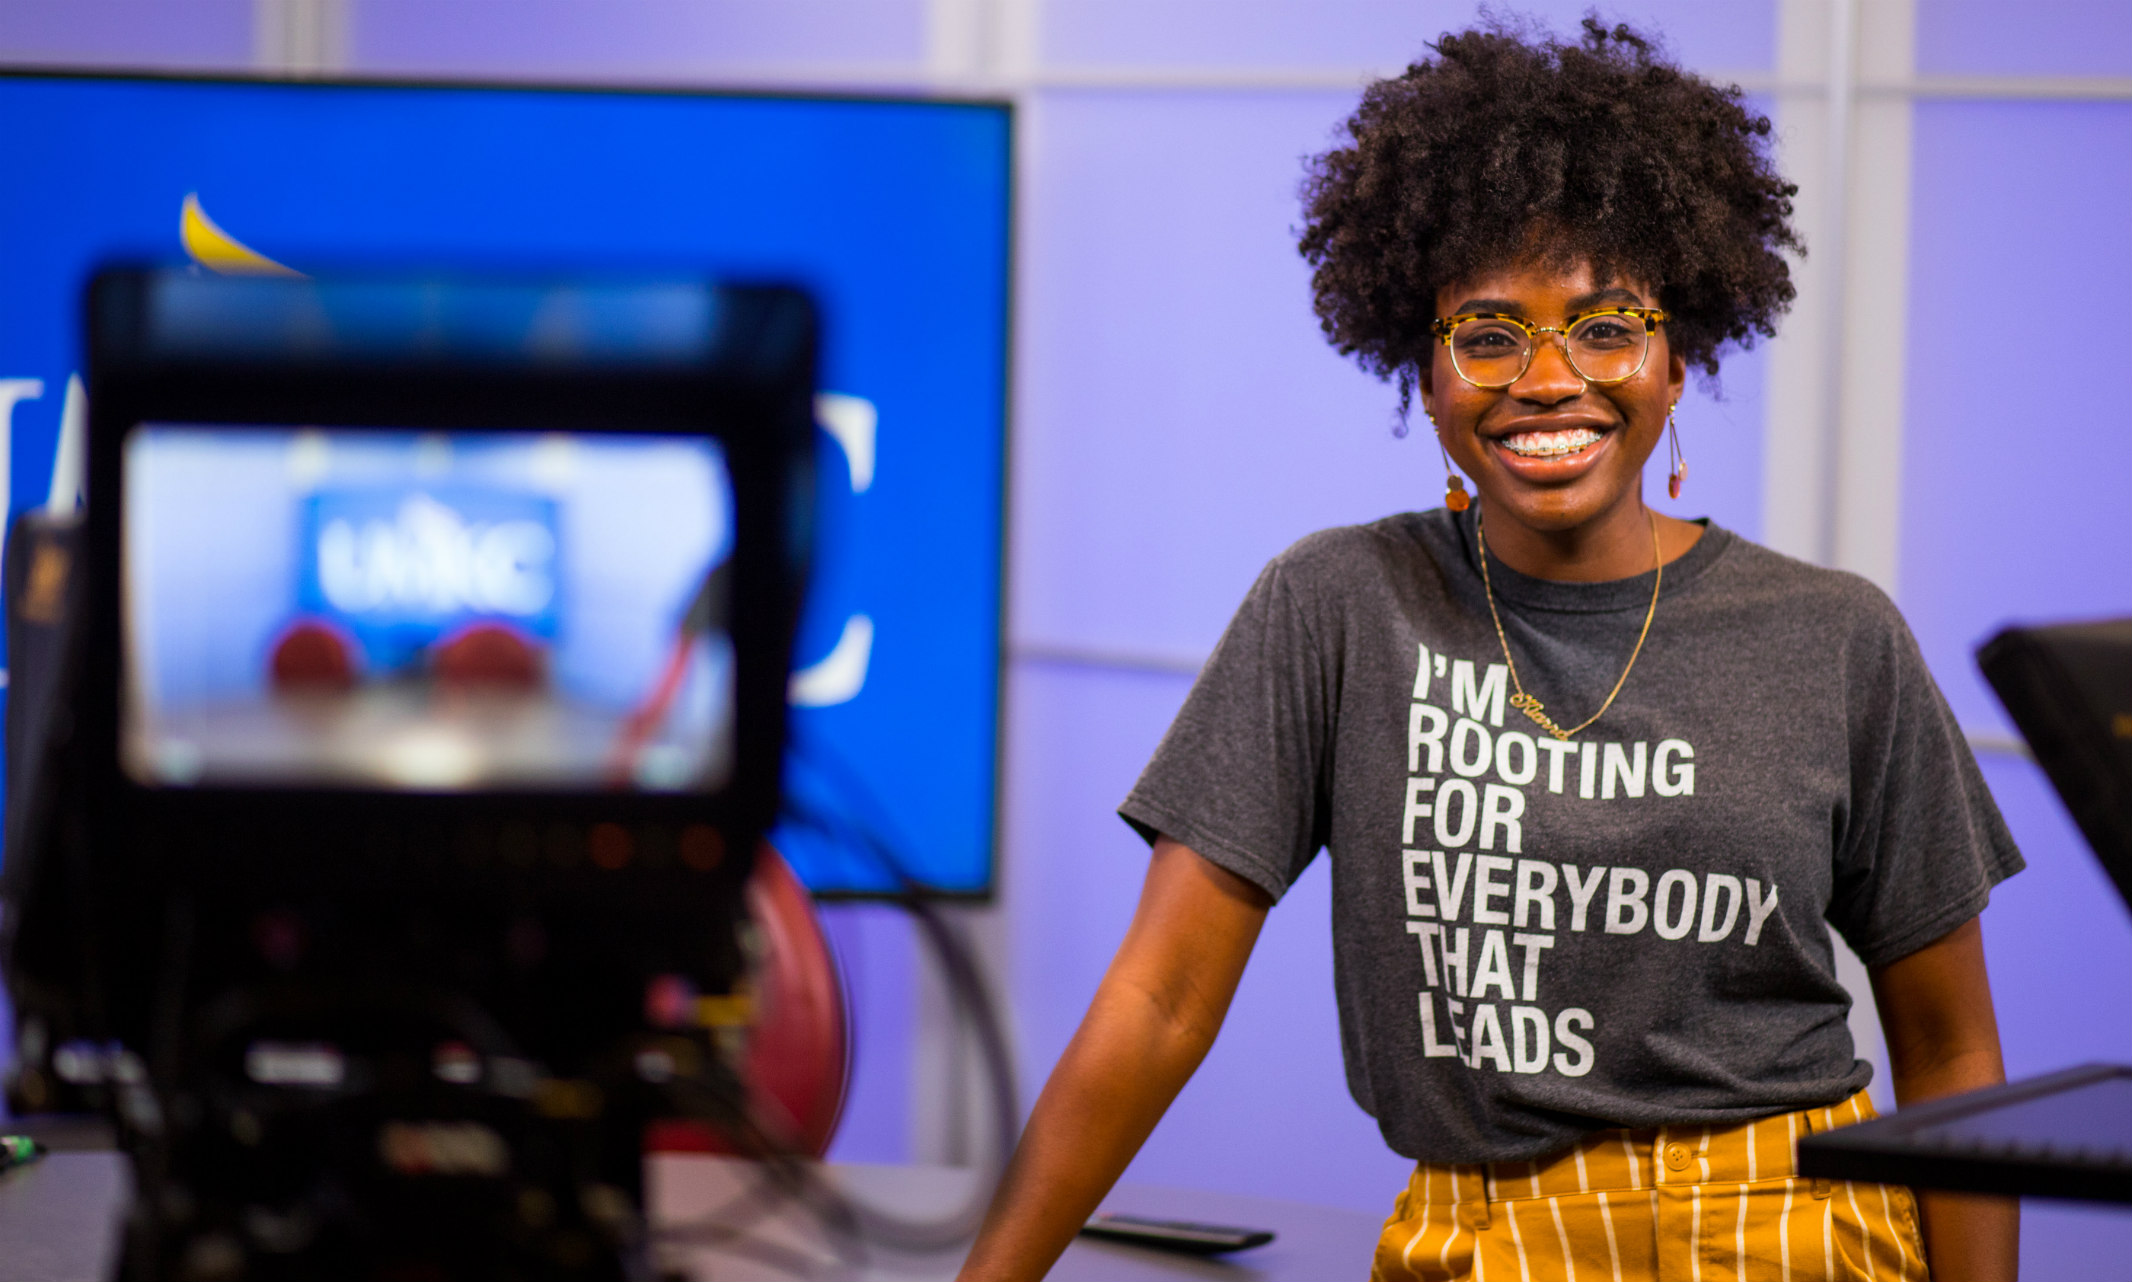 Kiarra-Brown-Edwards-in-TV-studio-for-Student-Storytelling-feature-photo